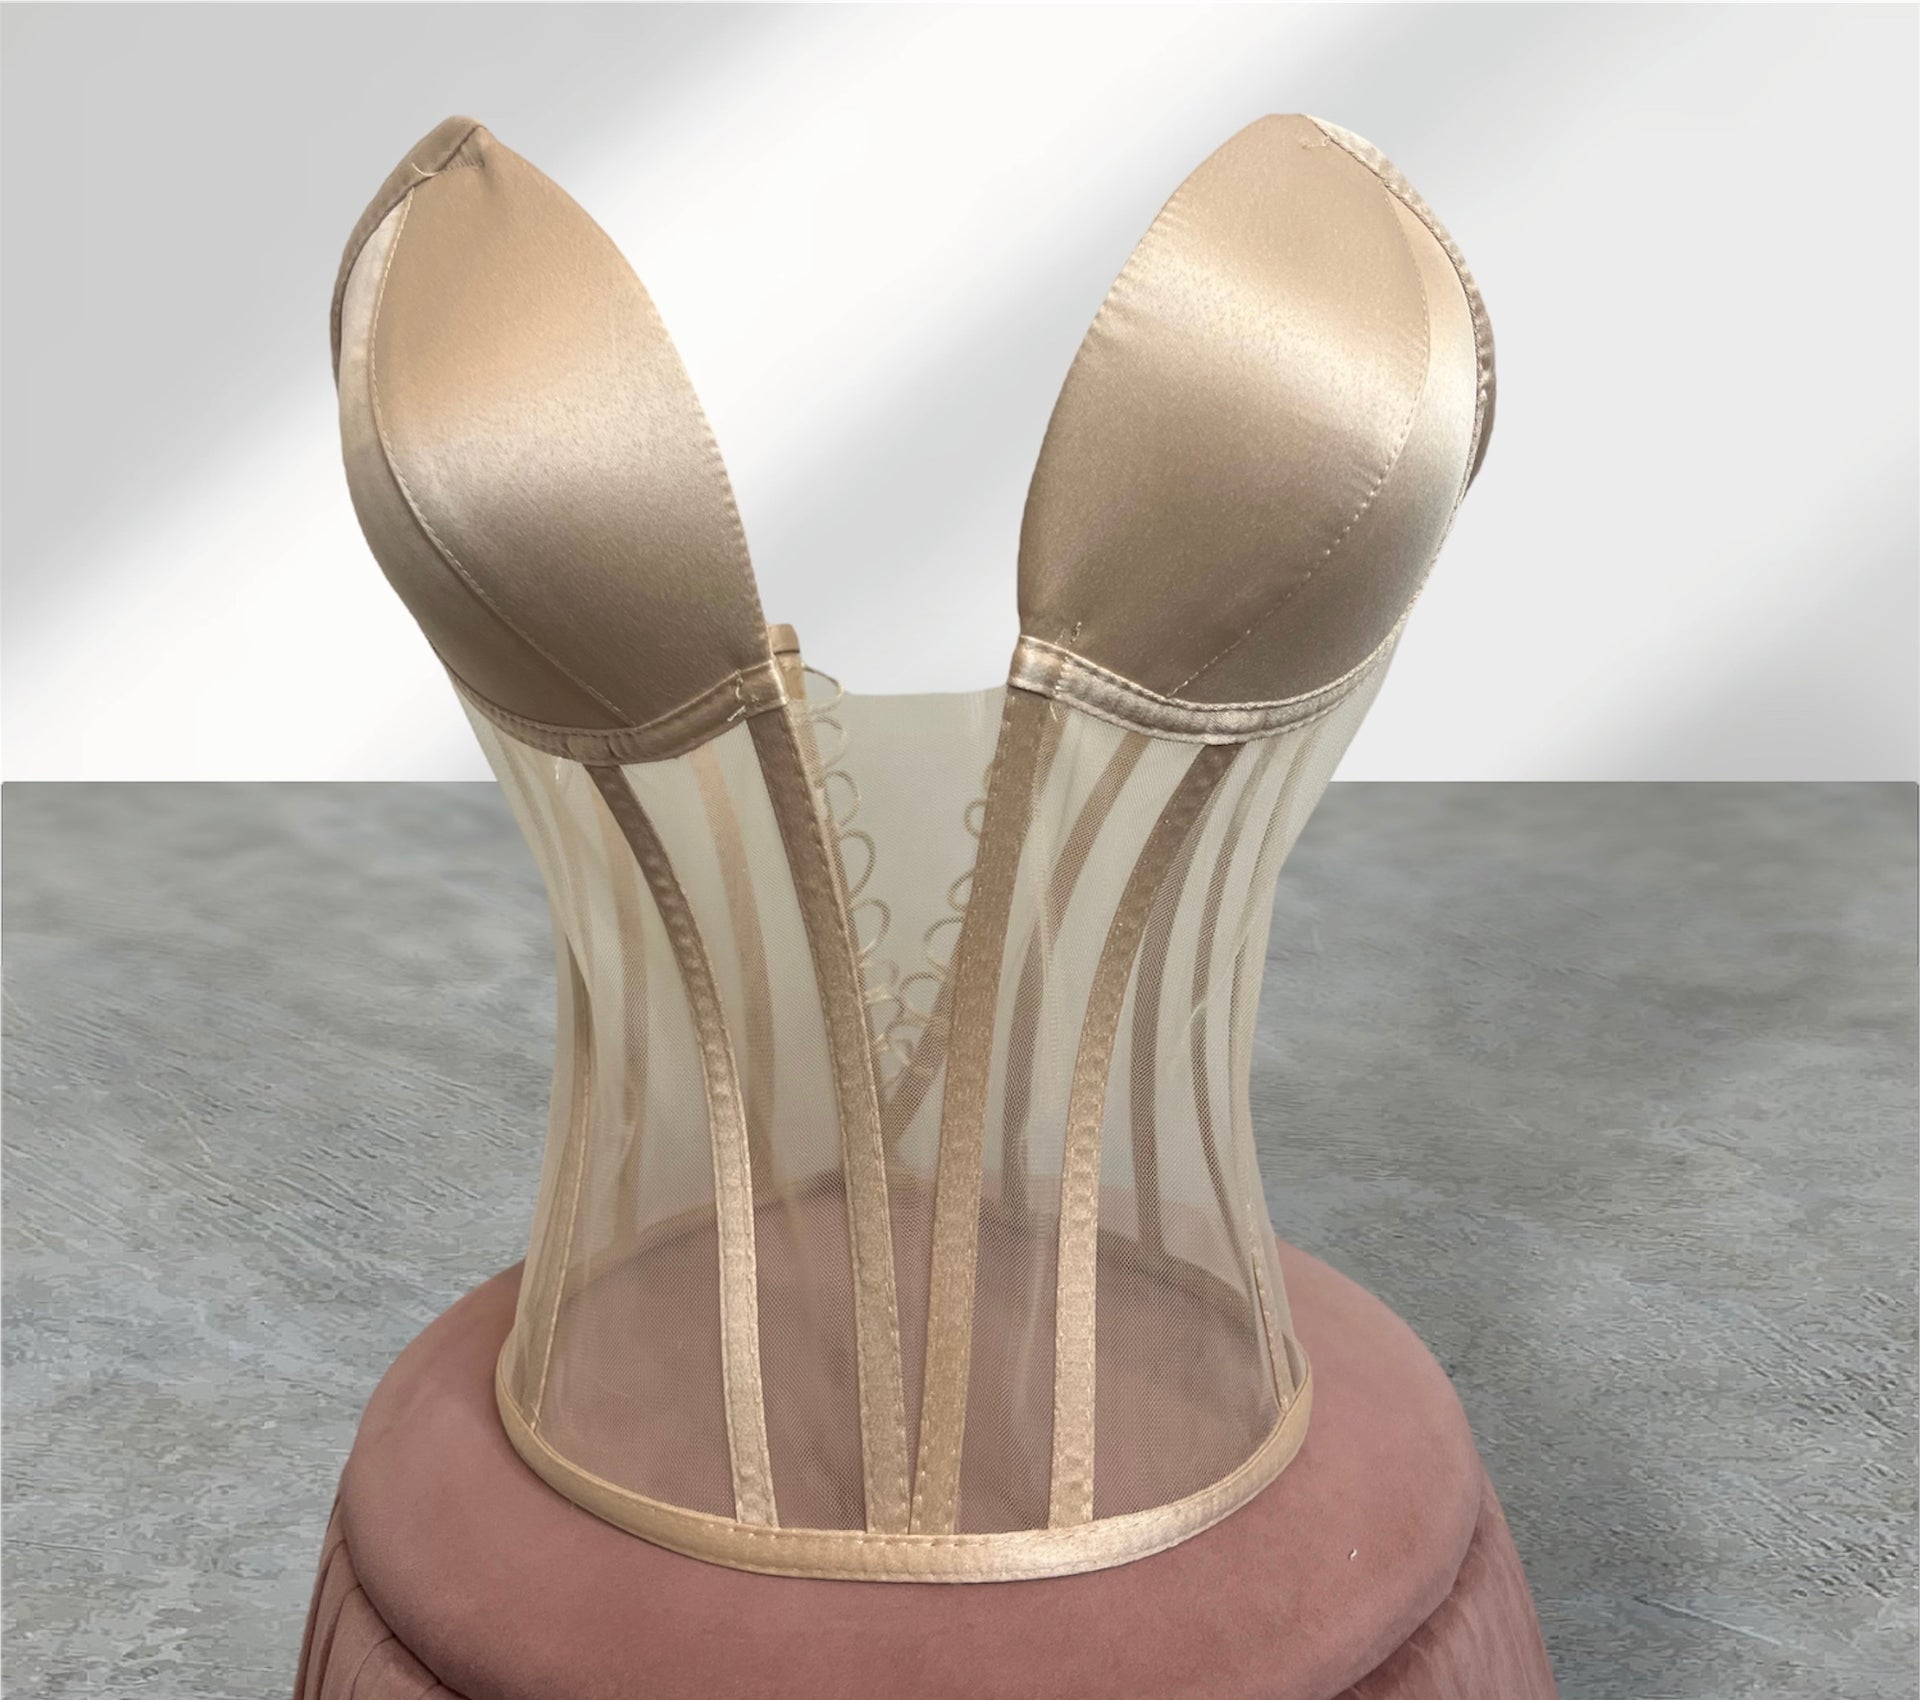 Beige corset with transparent cups